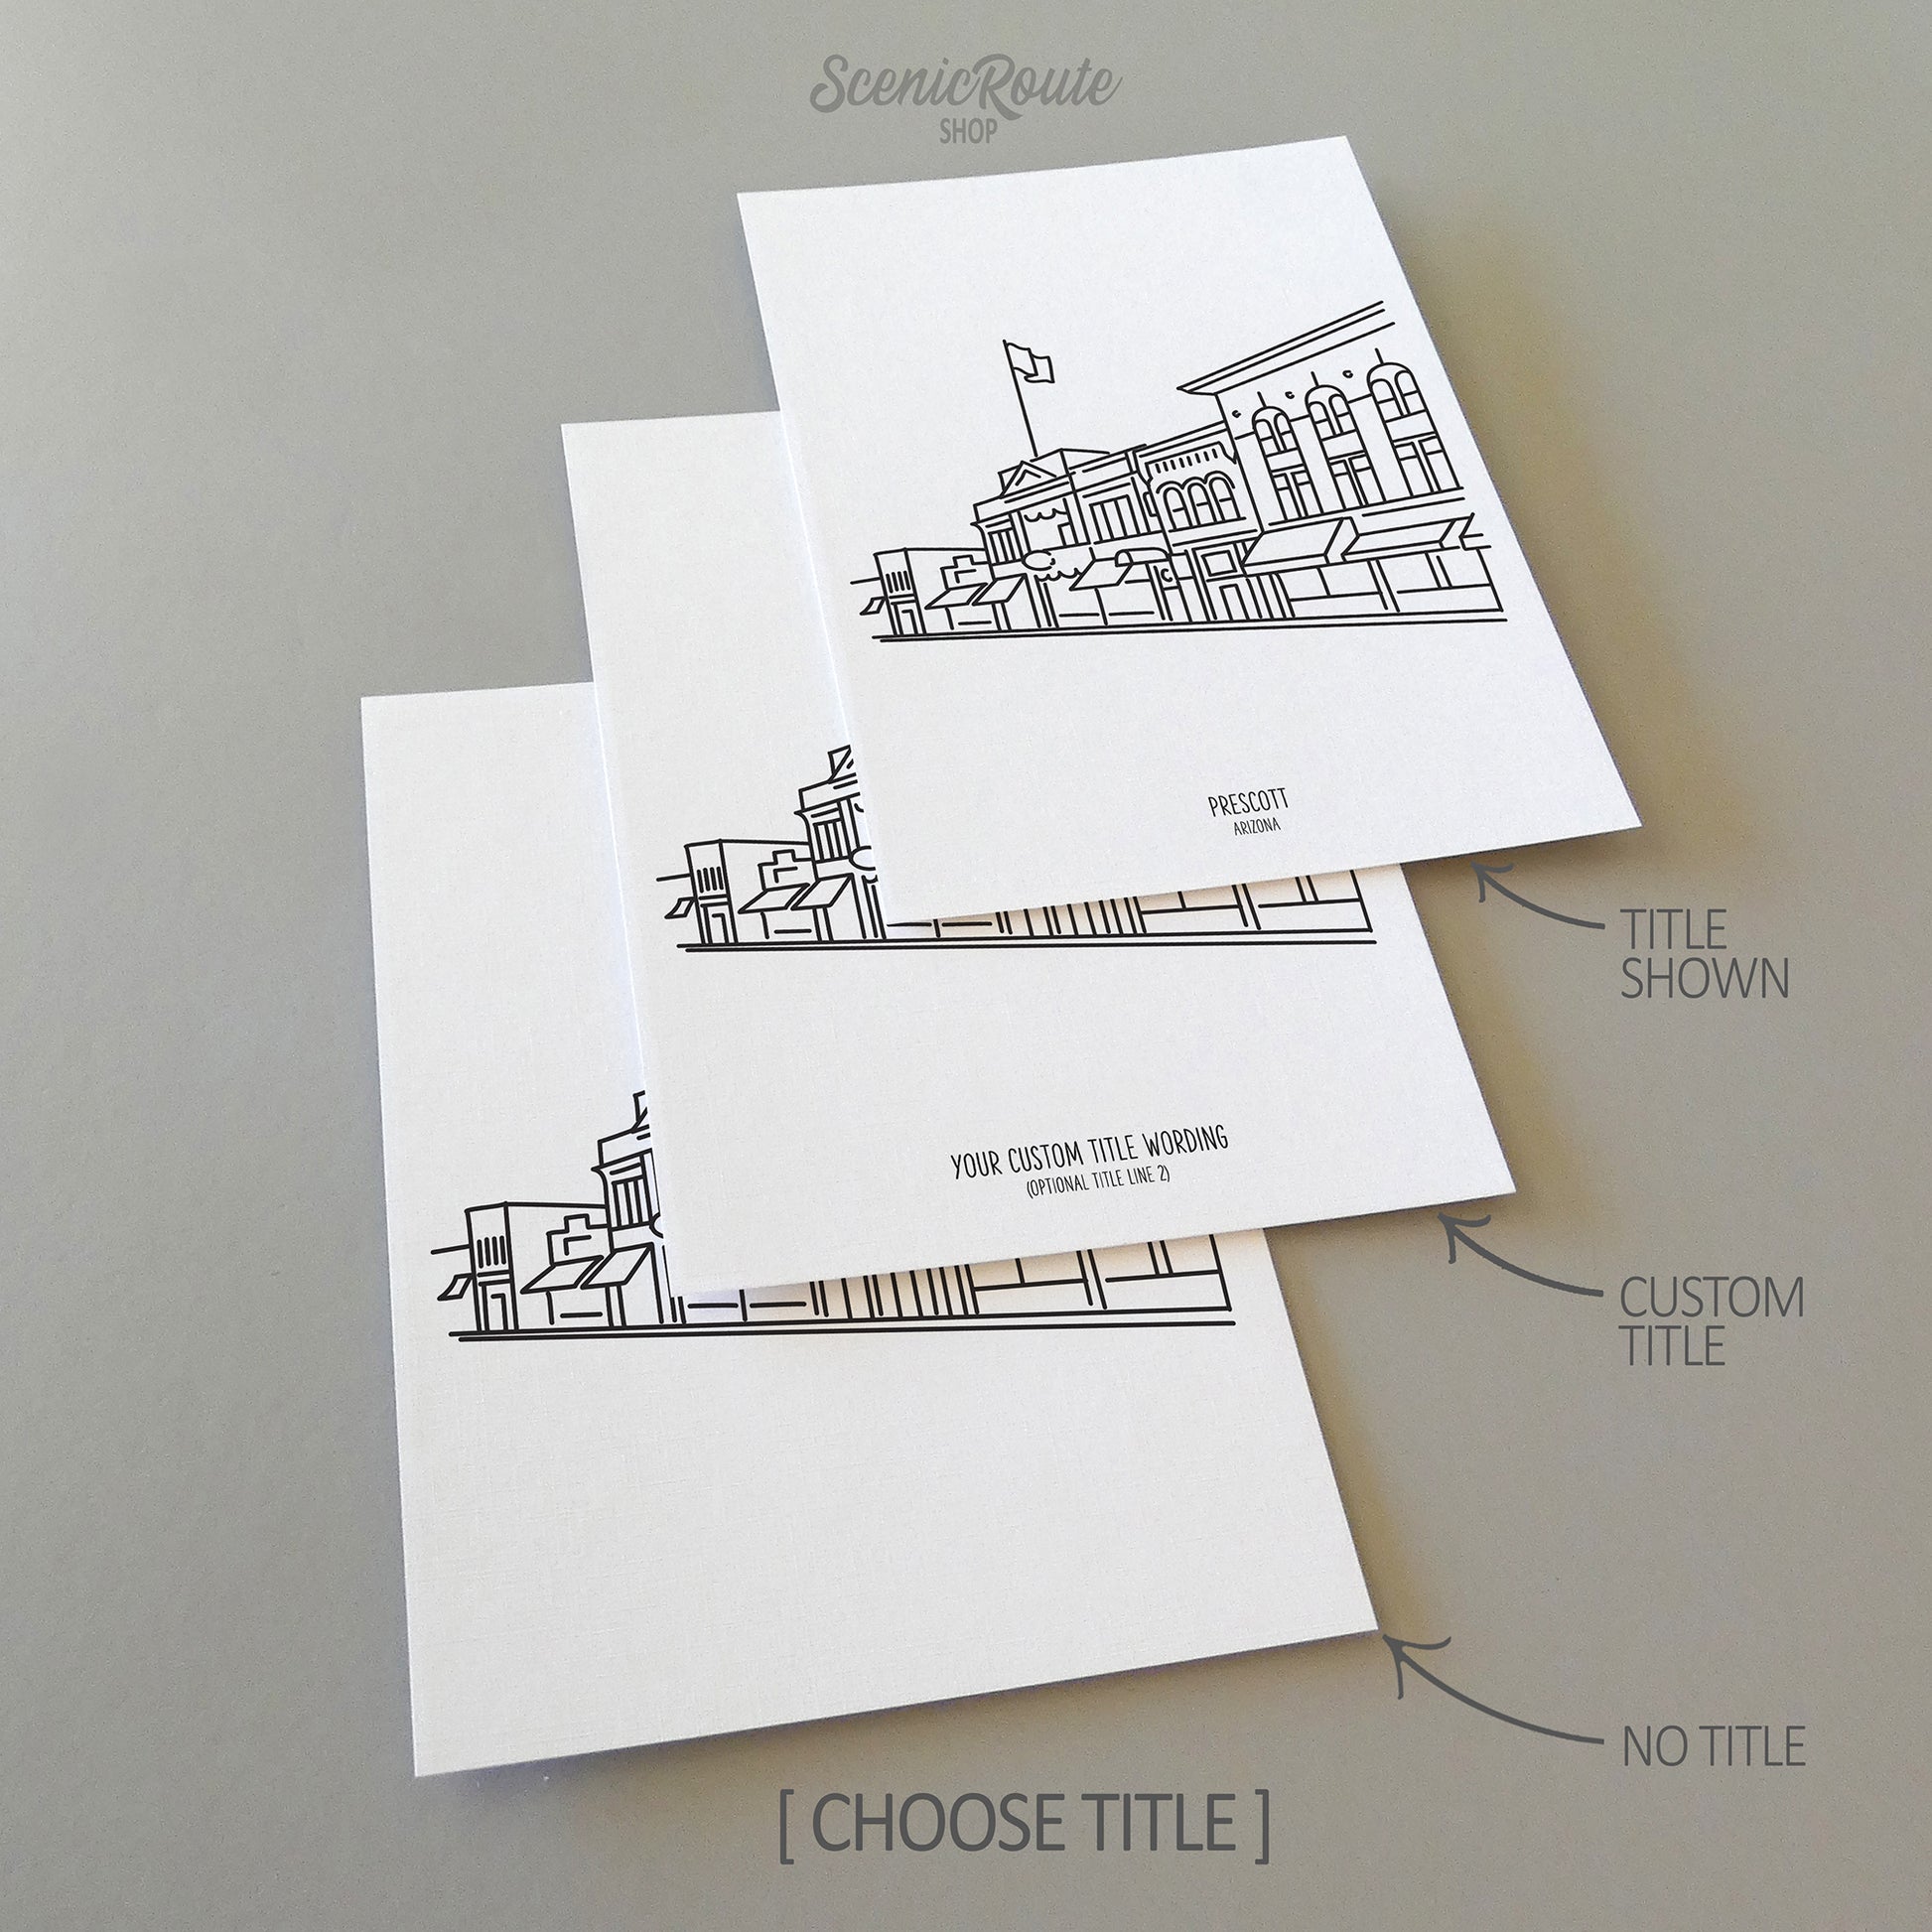 Three line art drawings of the Prescott Arizona Skyline on white linen paper with a gray background. The pieces are shown with title options that can be chosen and personalized.